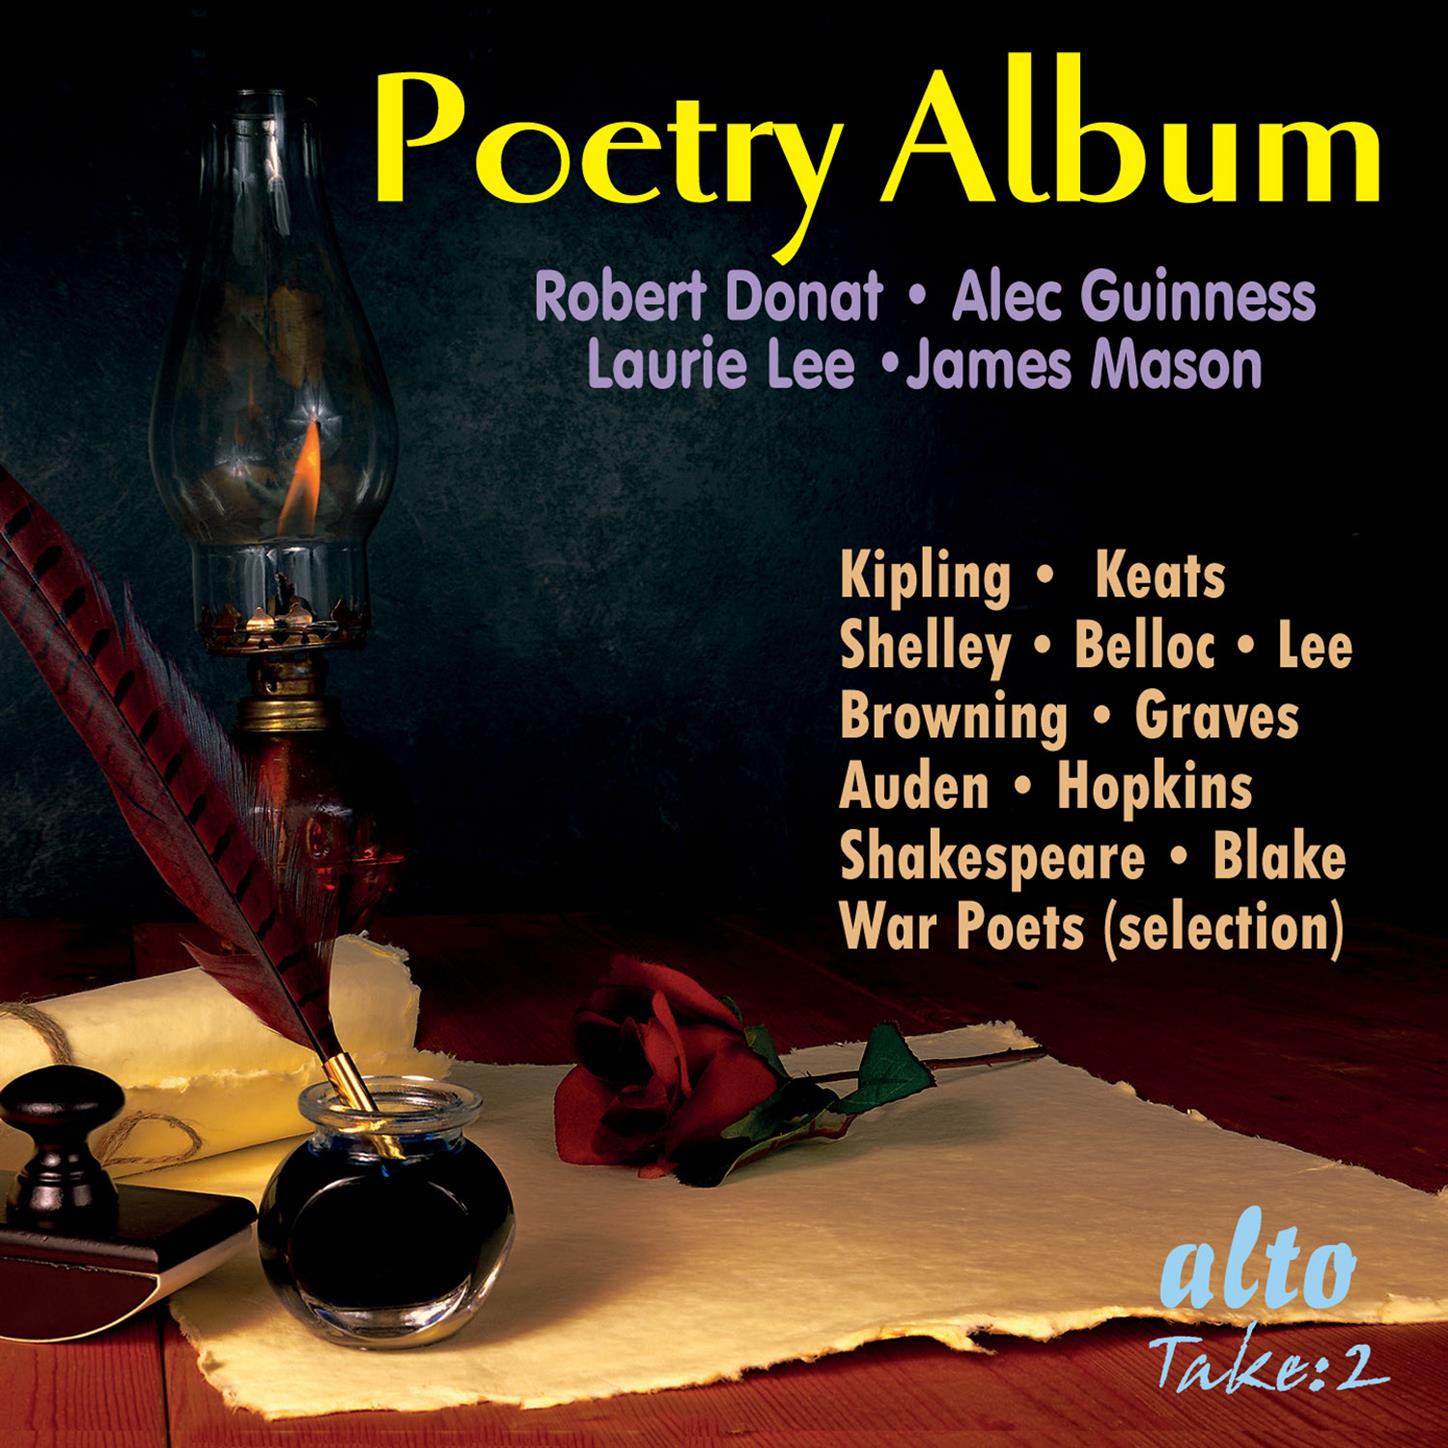 Robert Browning: A Toccata of Galuppi's